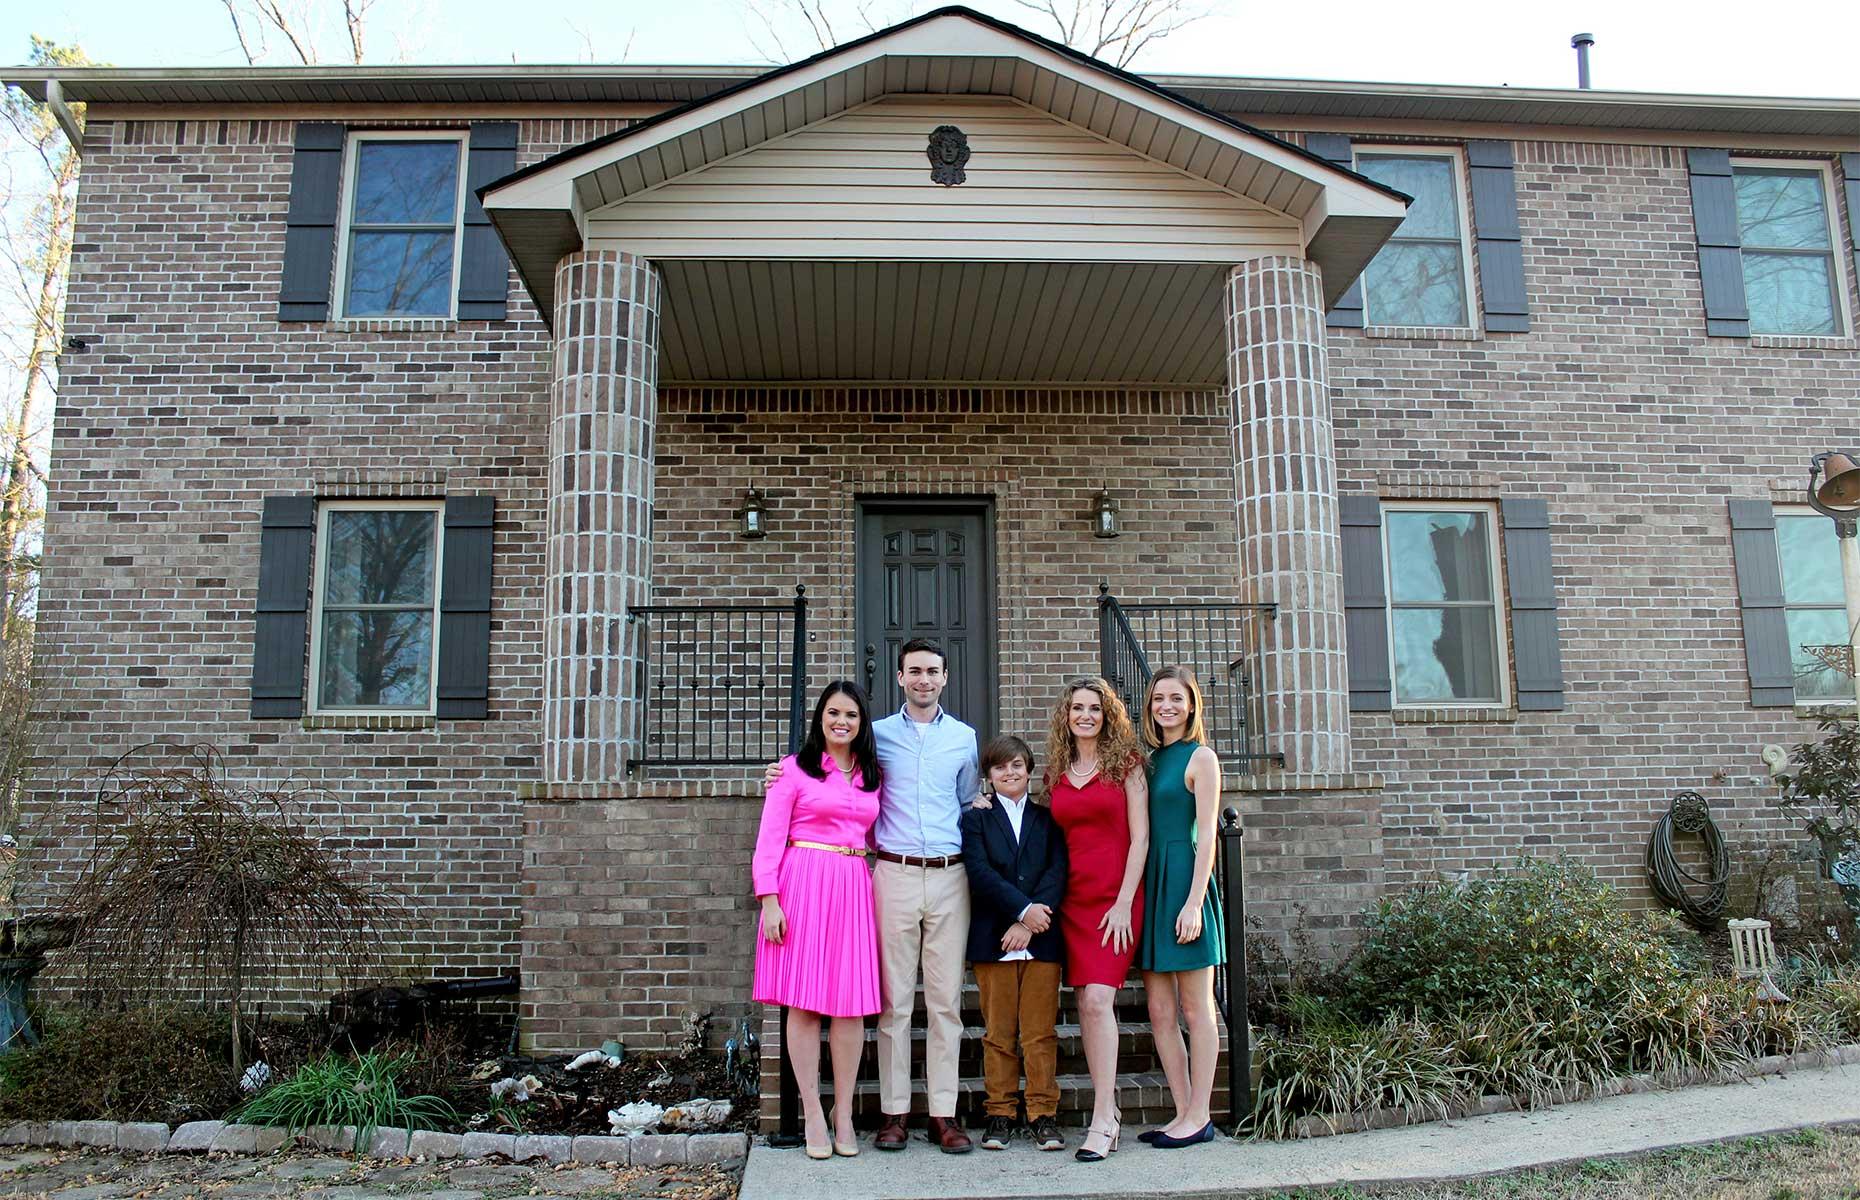 This remarkable family built their own dream home